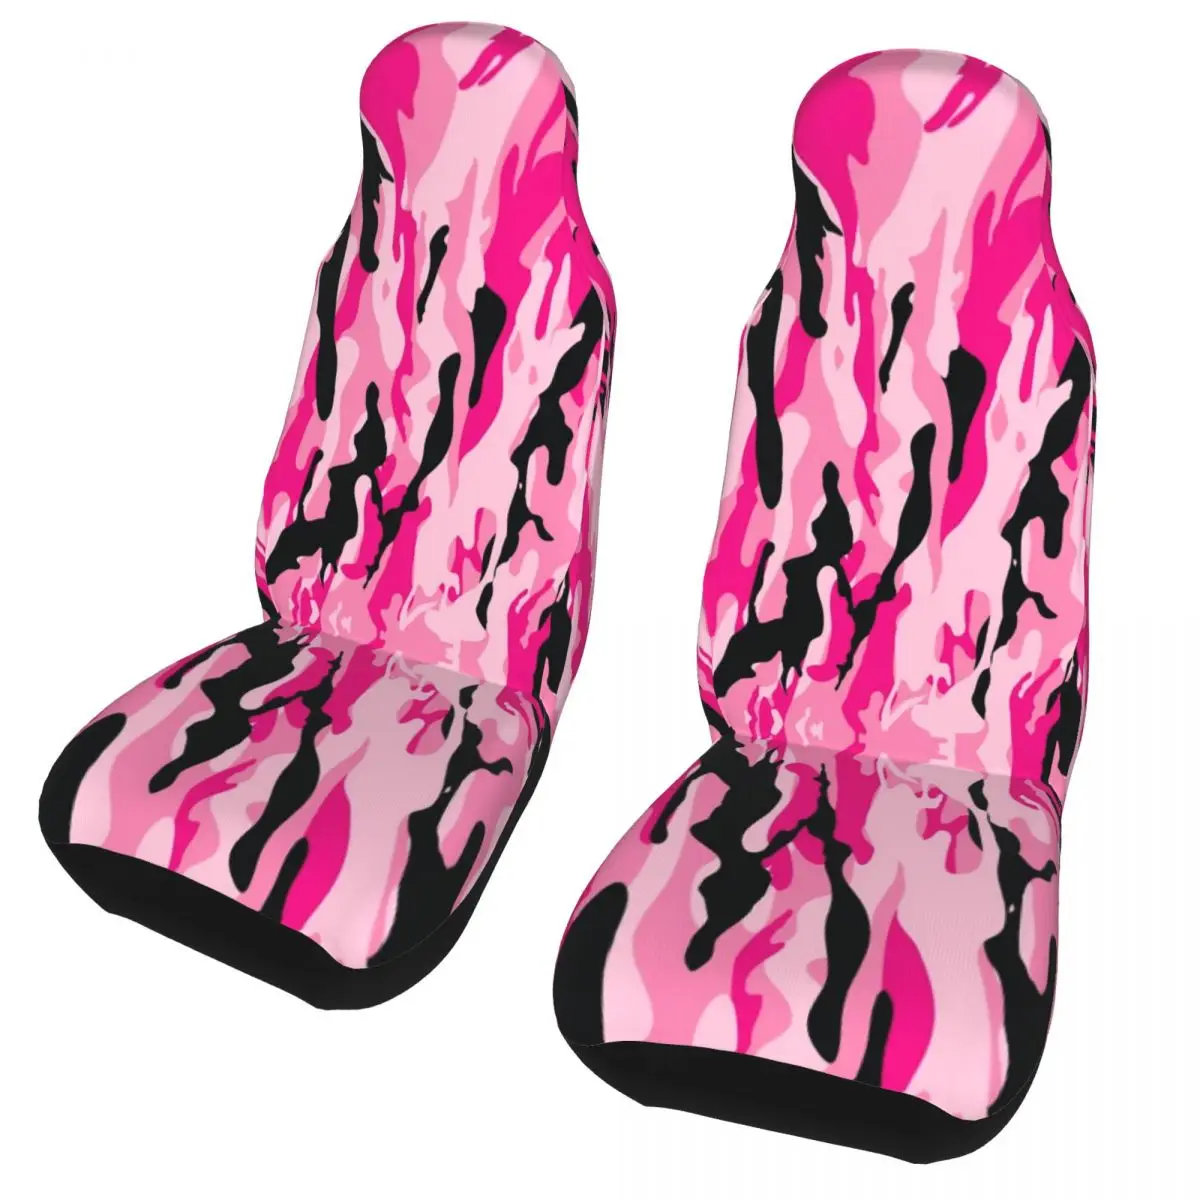 

Pink Army Camouflage Universal Car Seat Cover Four Seasons For SUV Front Rear Flocking Cloth Cushion Polyester Hunting